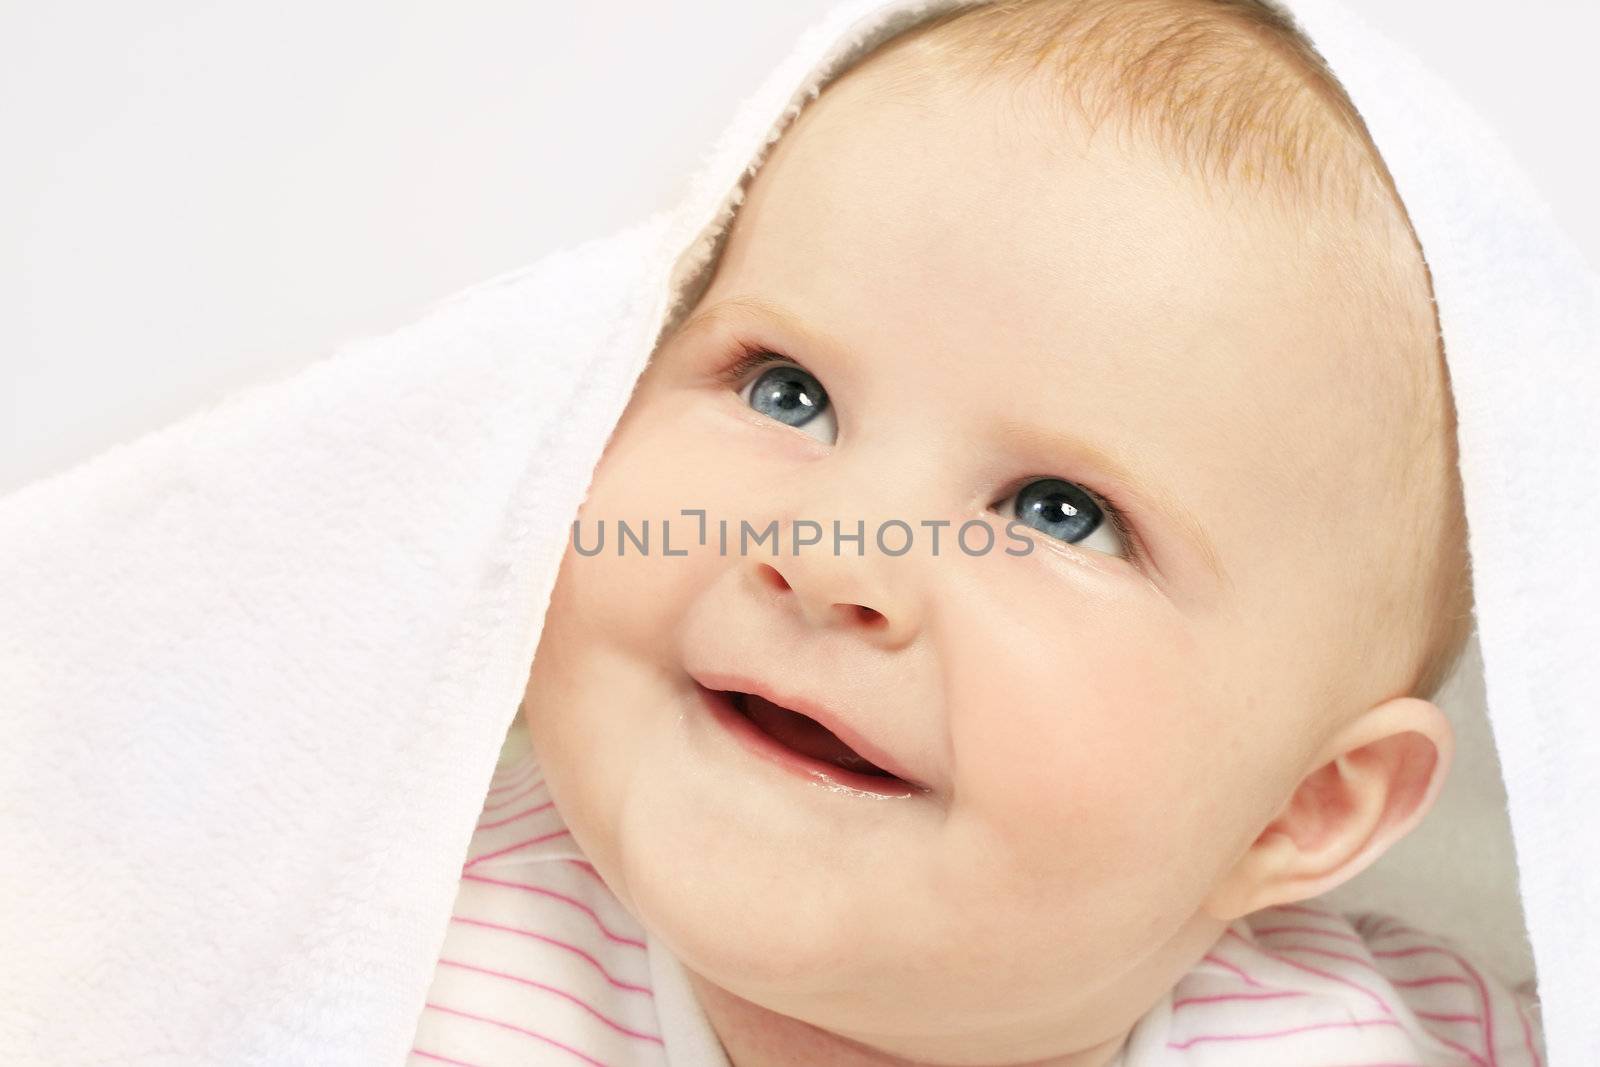 Adorable baby under a towel, looking up and smiling.